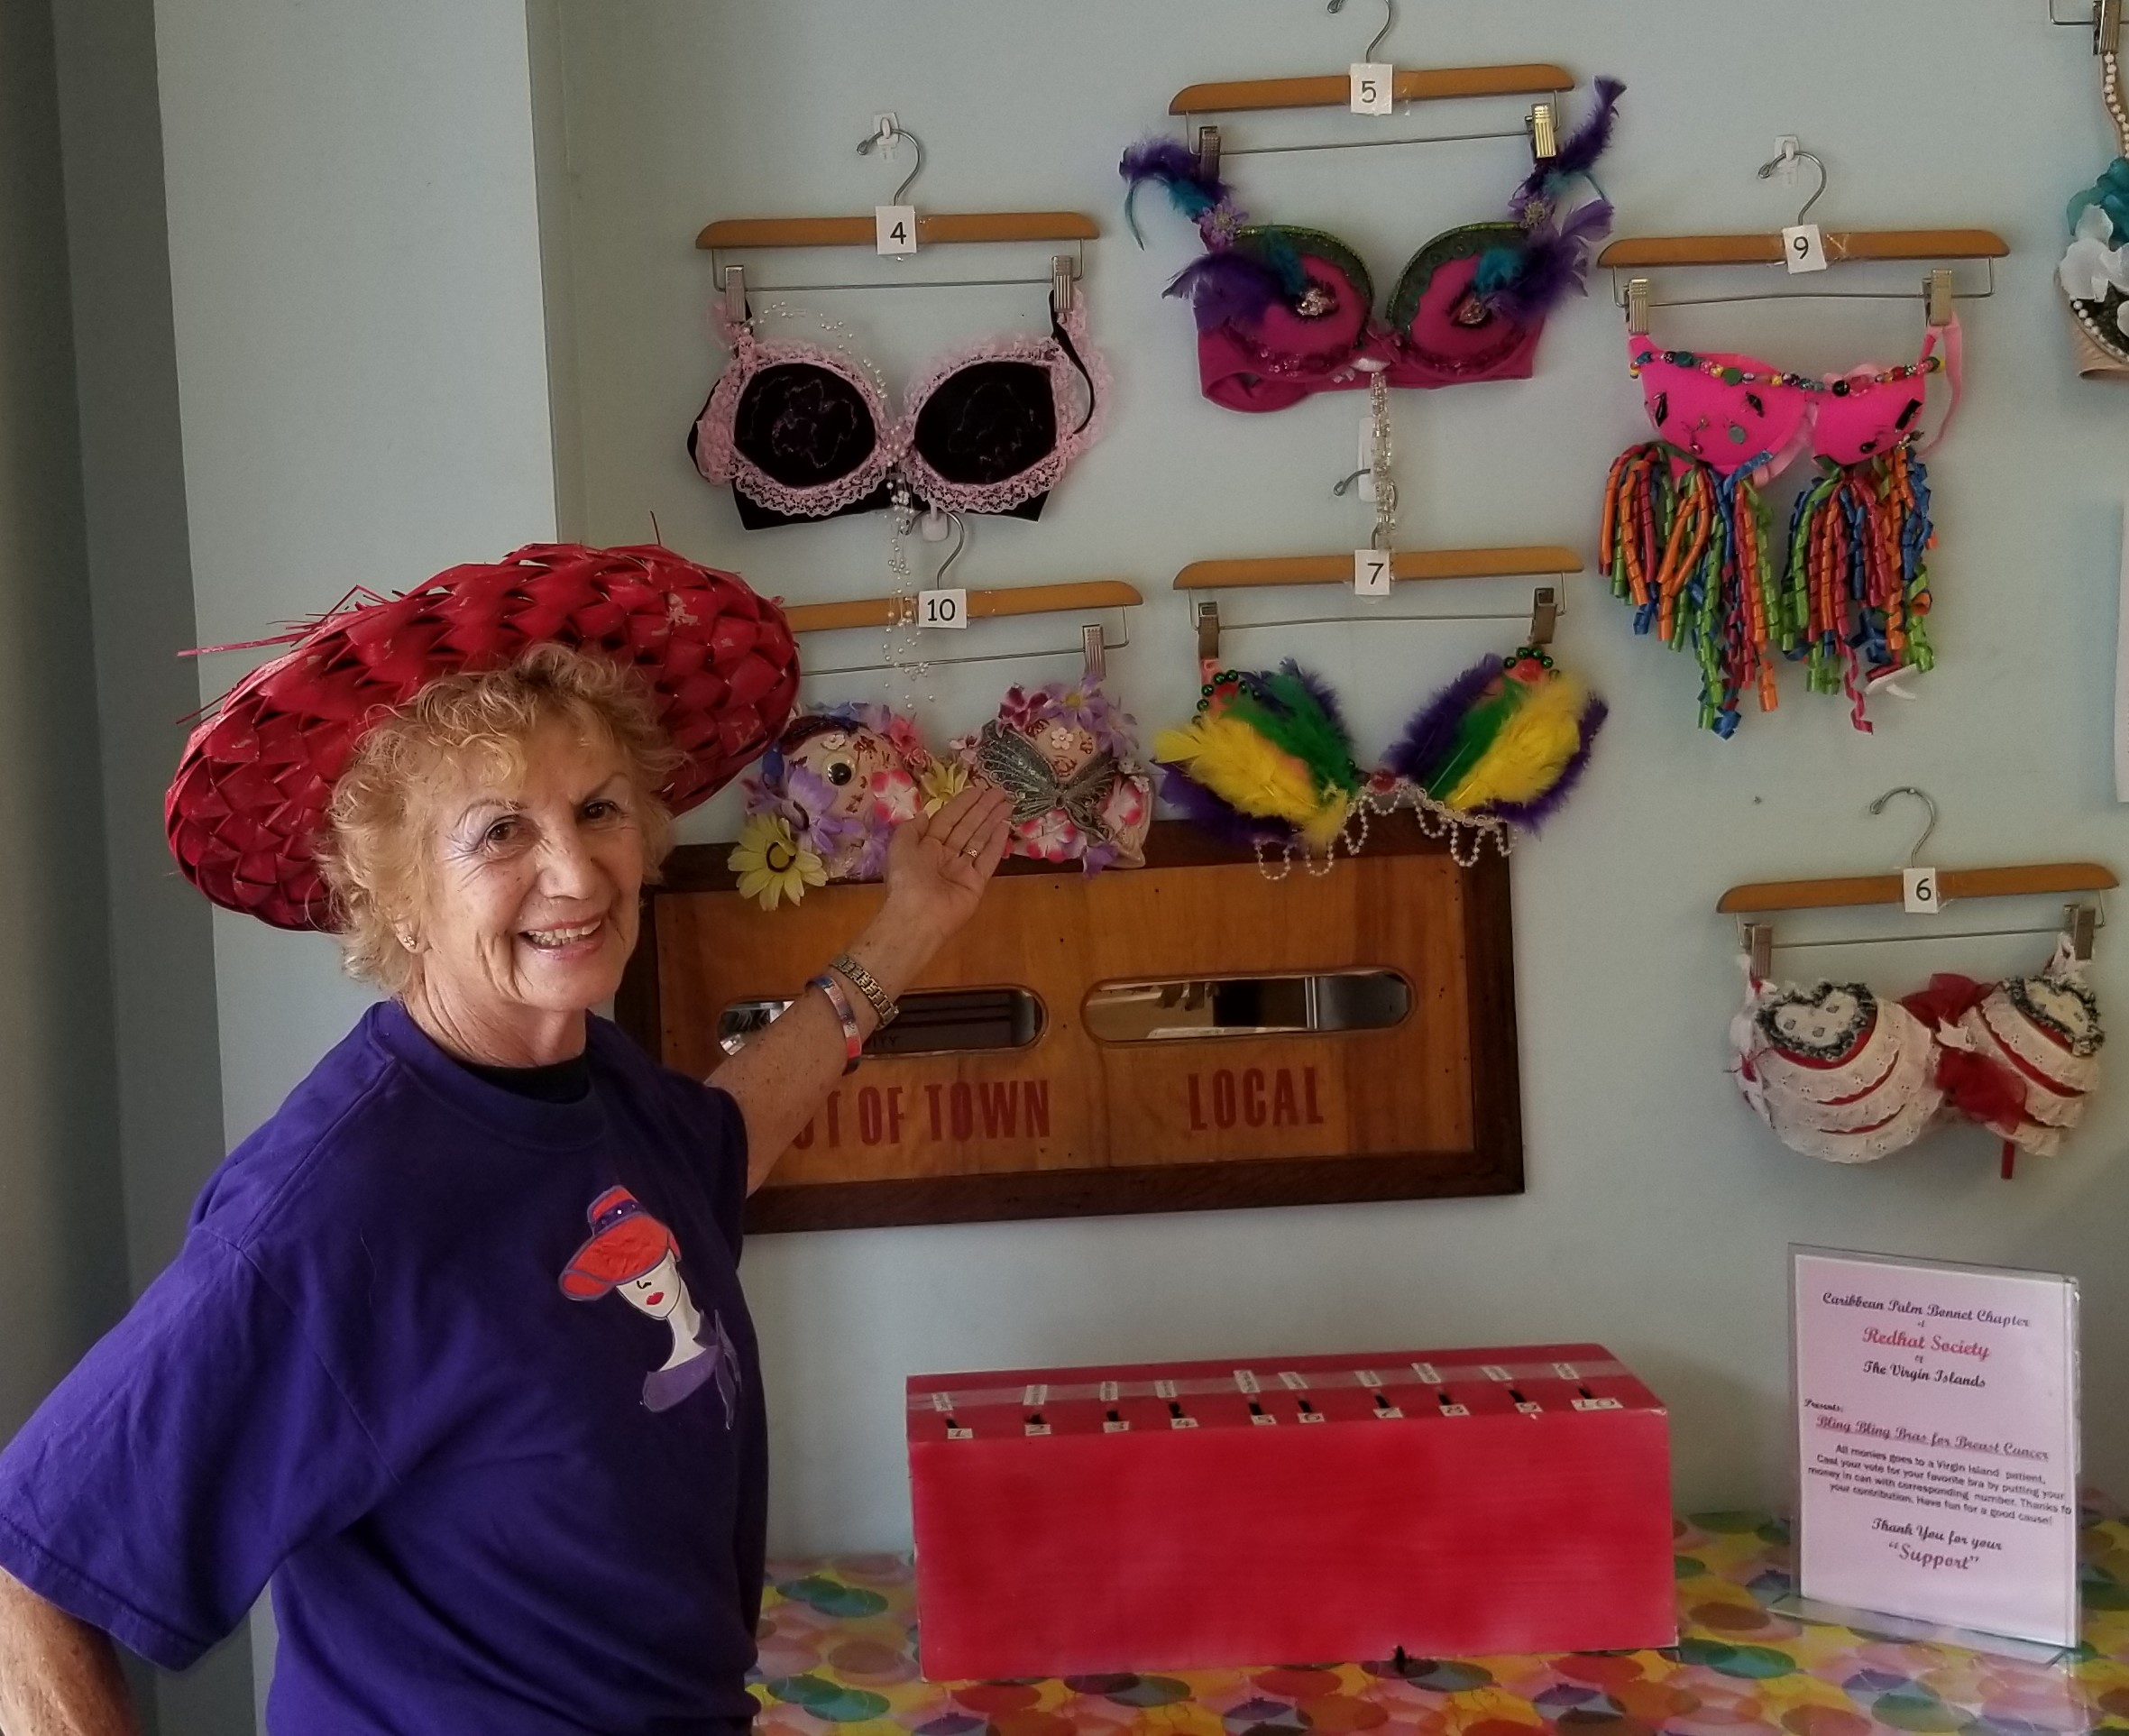 Displaying bras to raise awareness and funds for breast cancer